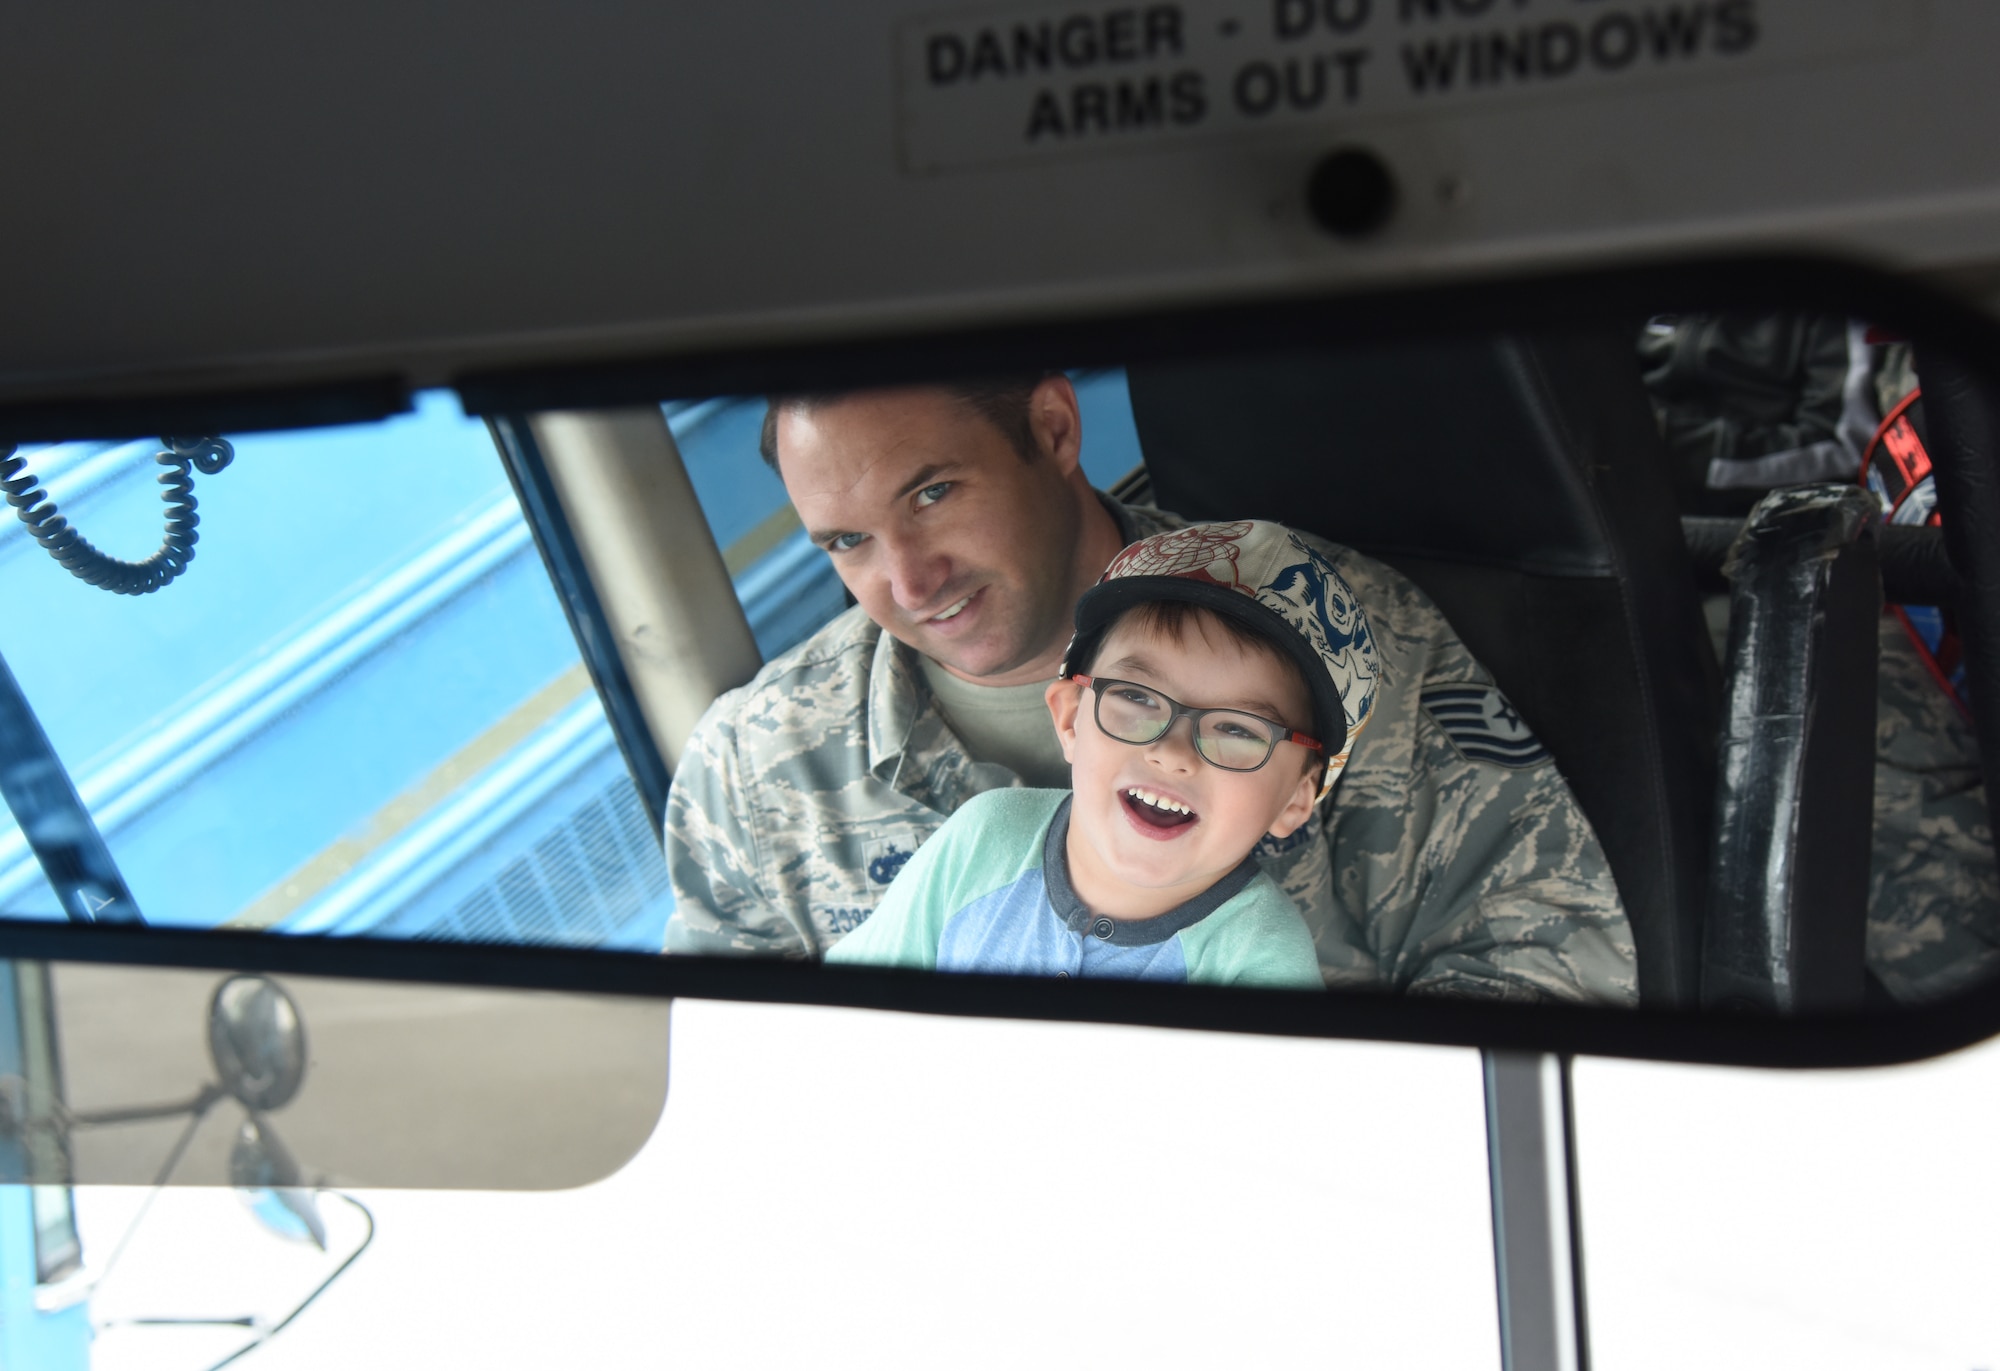 U.S. Air Force Tech. Sgt. Jason Repass, 81st Logistics Readiness Squadron vehicle operations control center supervisor, takes his son, Colton, on a bus tour during the 81st LRS Bring Your Child to Work Day event at the ground transportation yard at Keesler Air Force Base, Mississippi, April 26, 2018. The event allowed children the opportunity to experience what their parents do at work by touring facilities while receiving hands-on experiences. (U.S. Air Force photo by Kemberly Groue)